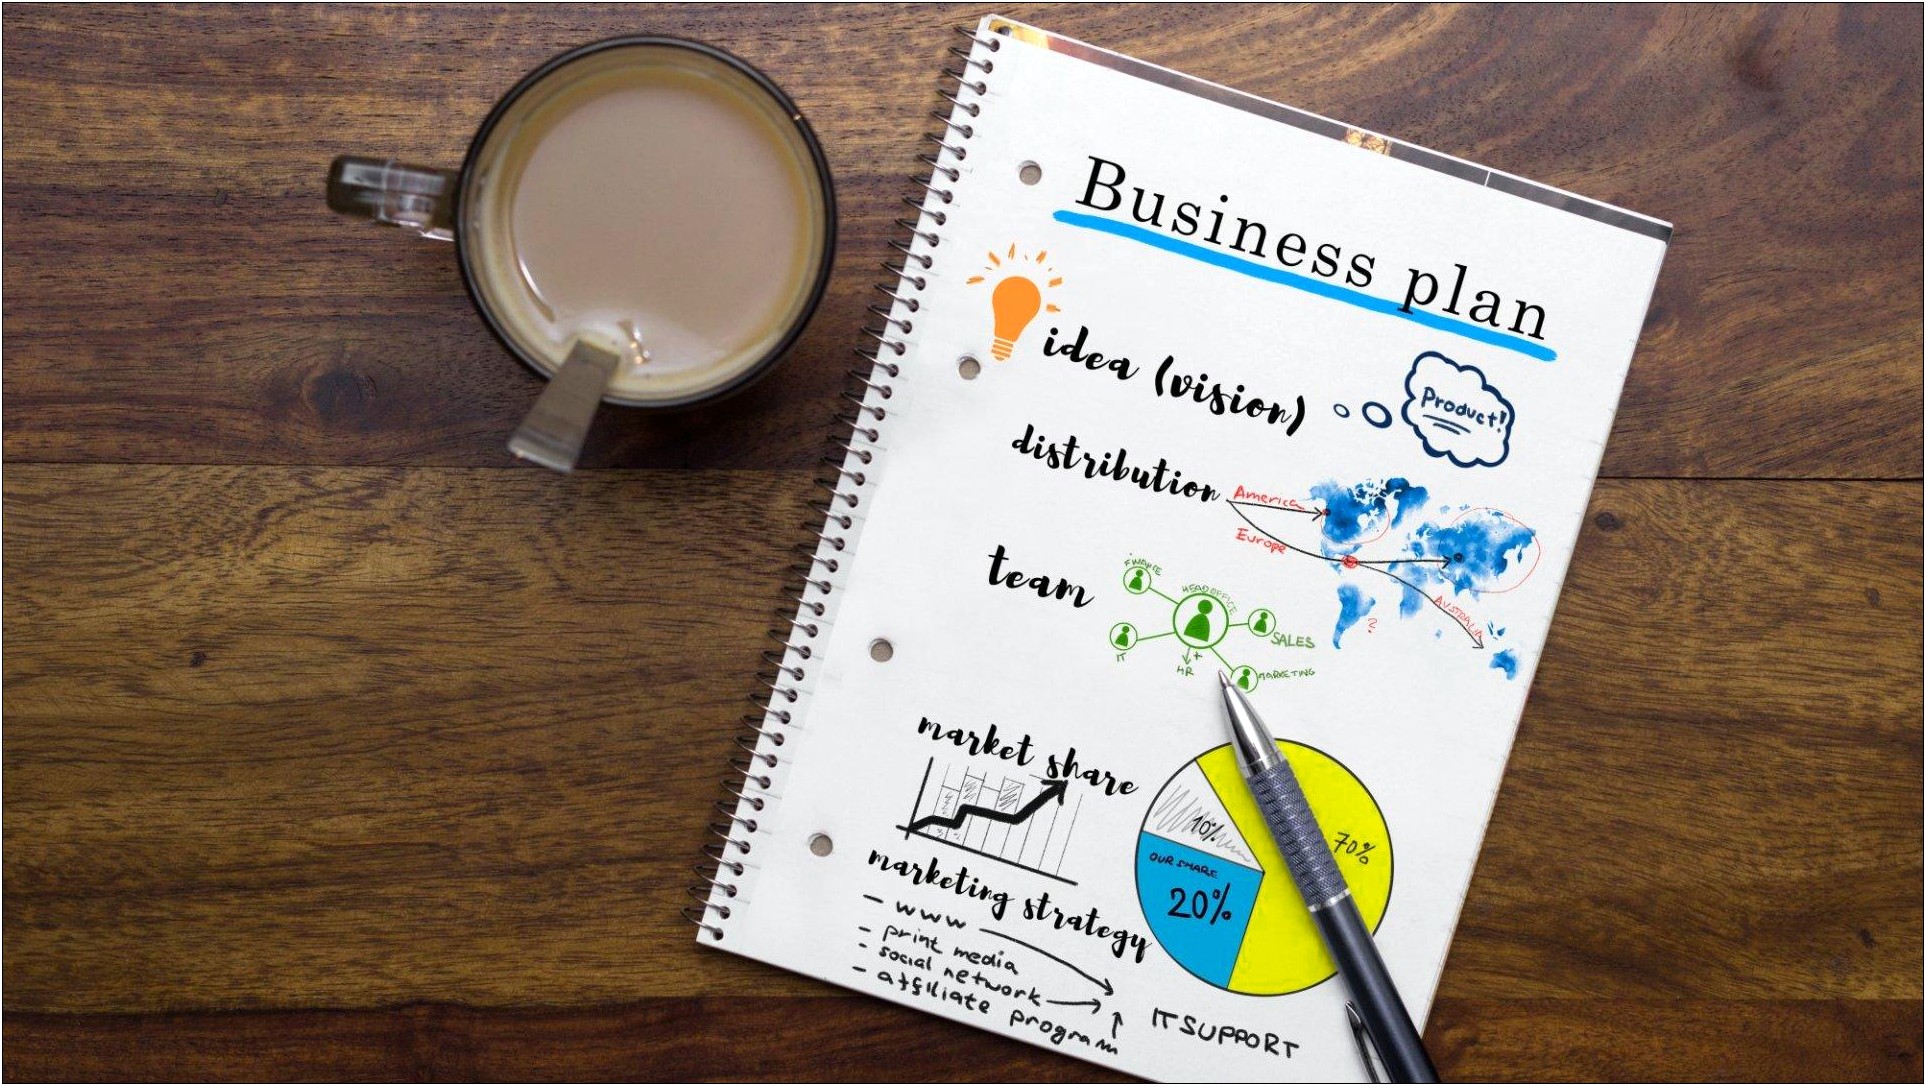 Download The Free Restaurant Business Plan Template